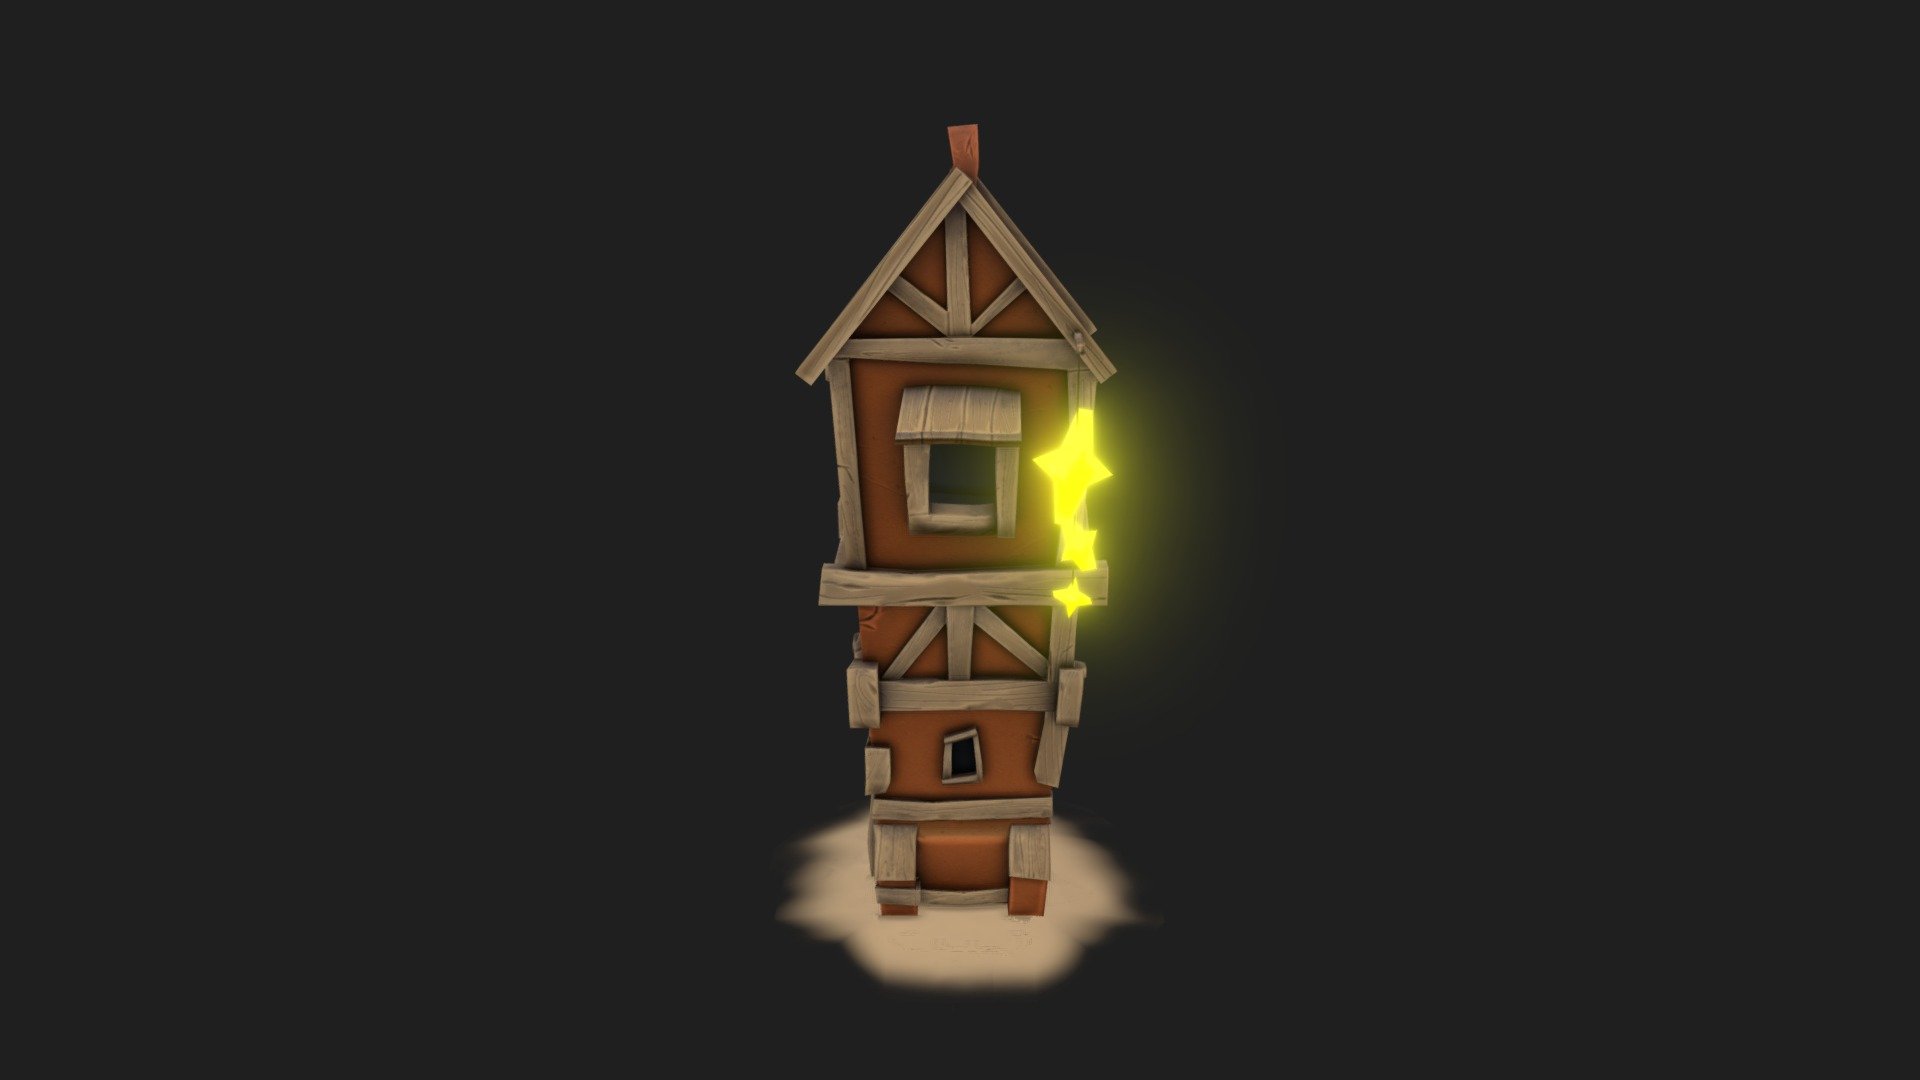 stylized poor house that i make from zbrush and substance to practice,
thanks for the guy for the refrence image :) - stylized house - Stylized Cartoon - Download Free 3D model by darkred21 (@darkred) 3d model